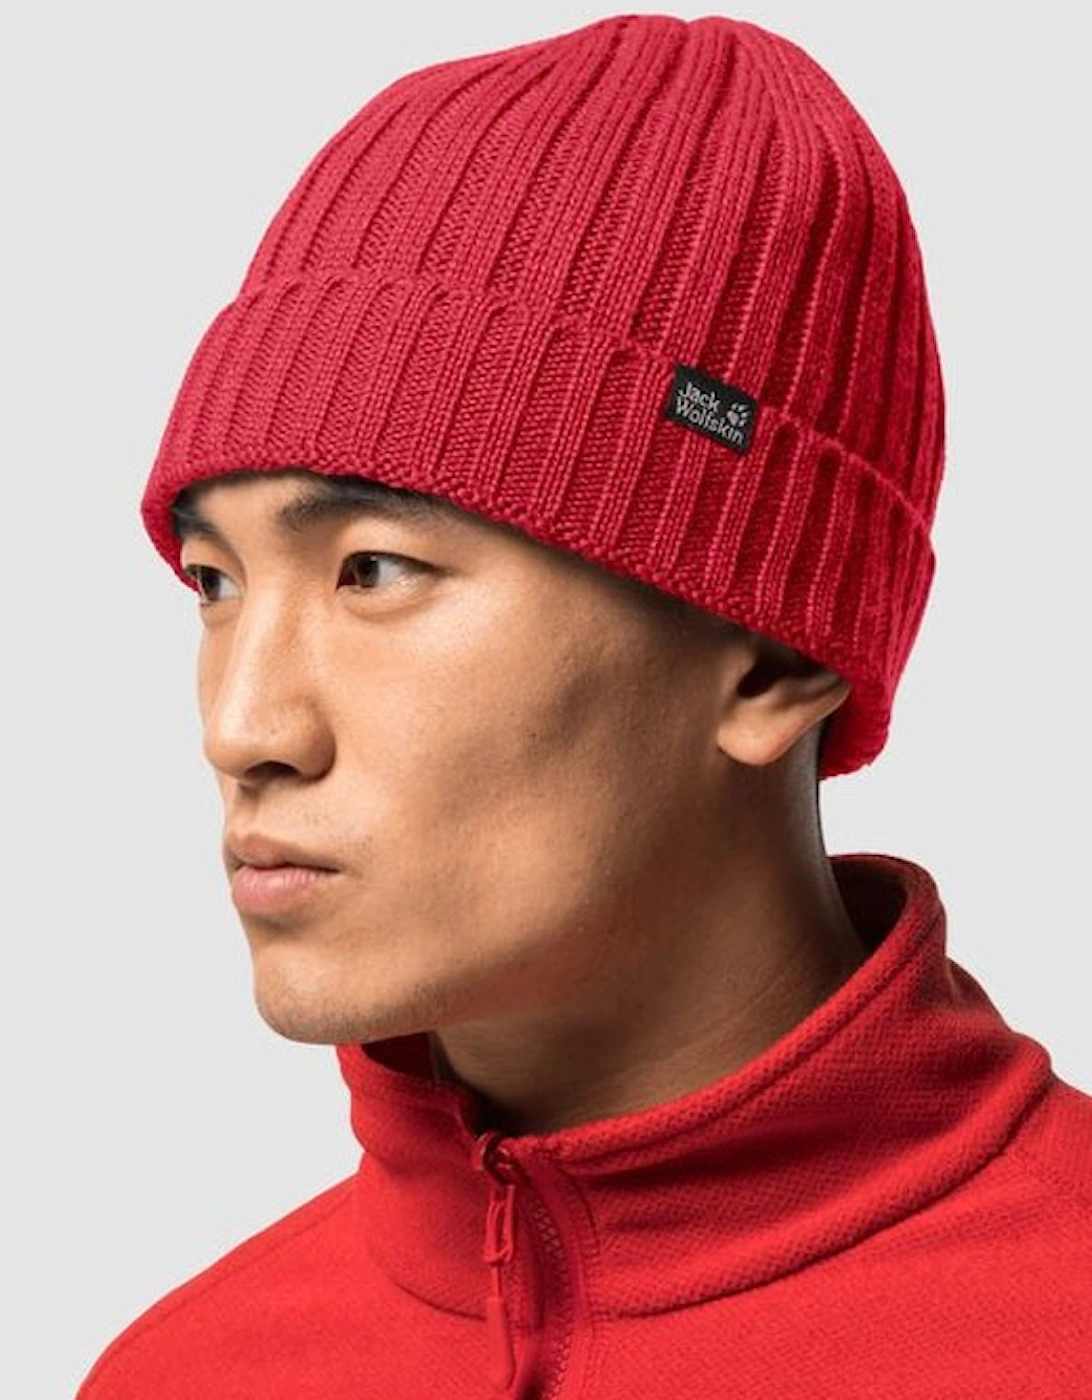 Stormlock Rip Knit Cap Red Lacquer